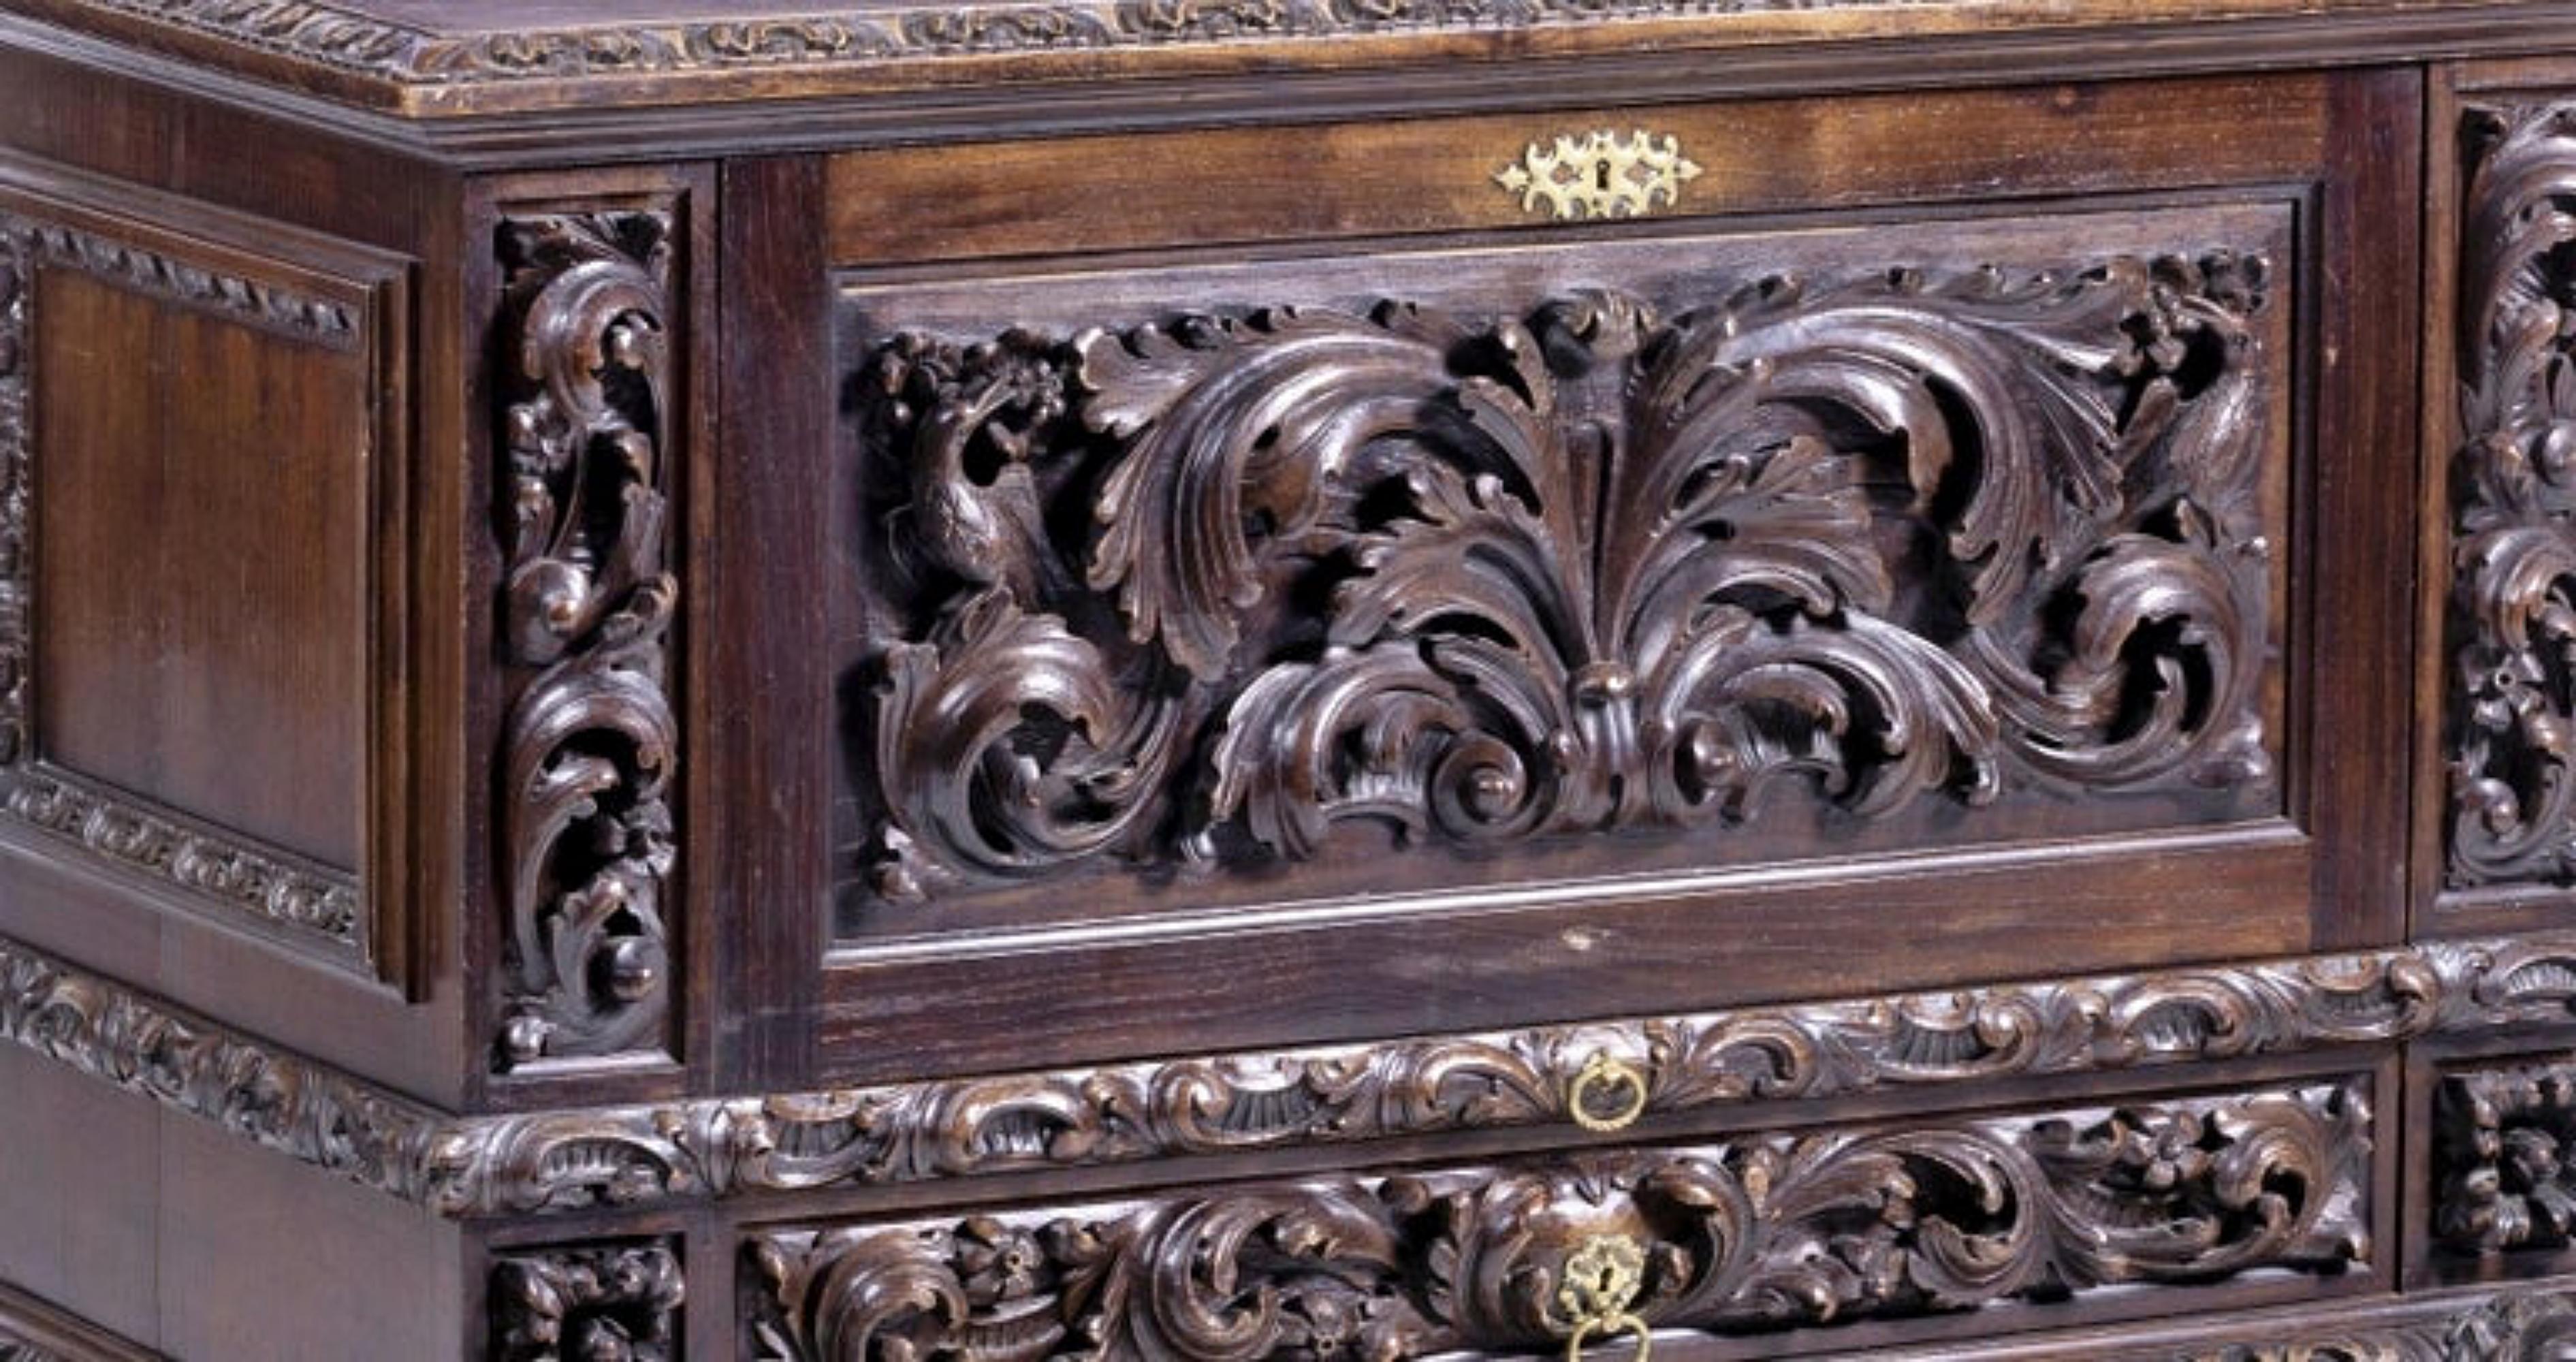 Hand-Crafted Portuguese Ark / Credenza of the 19th Century